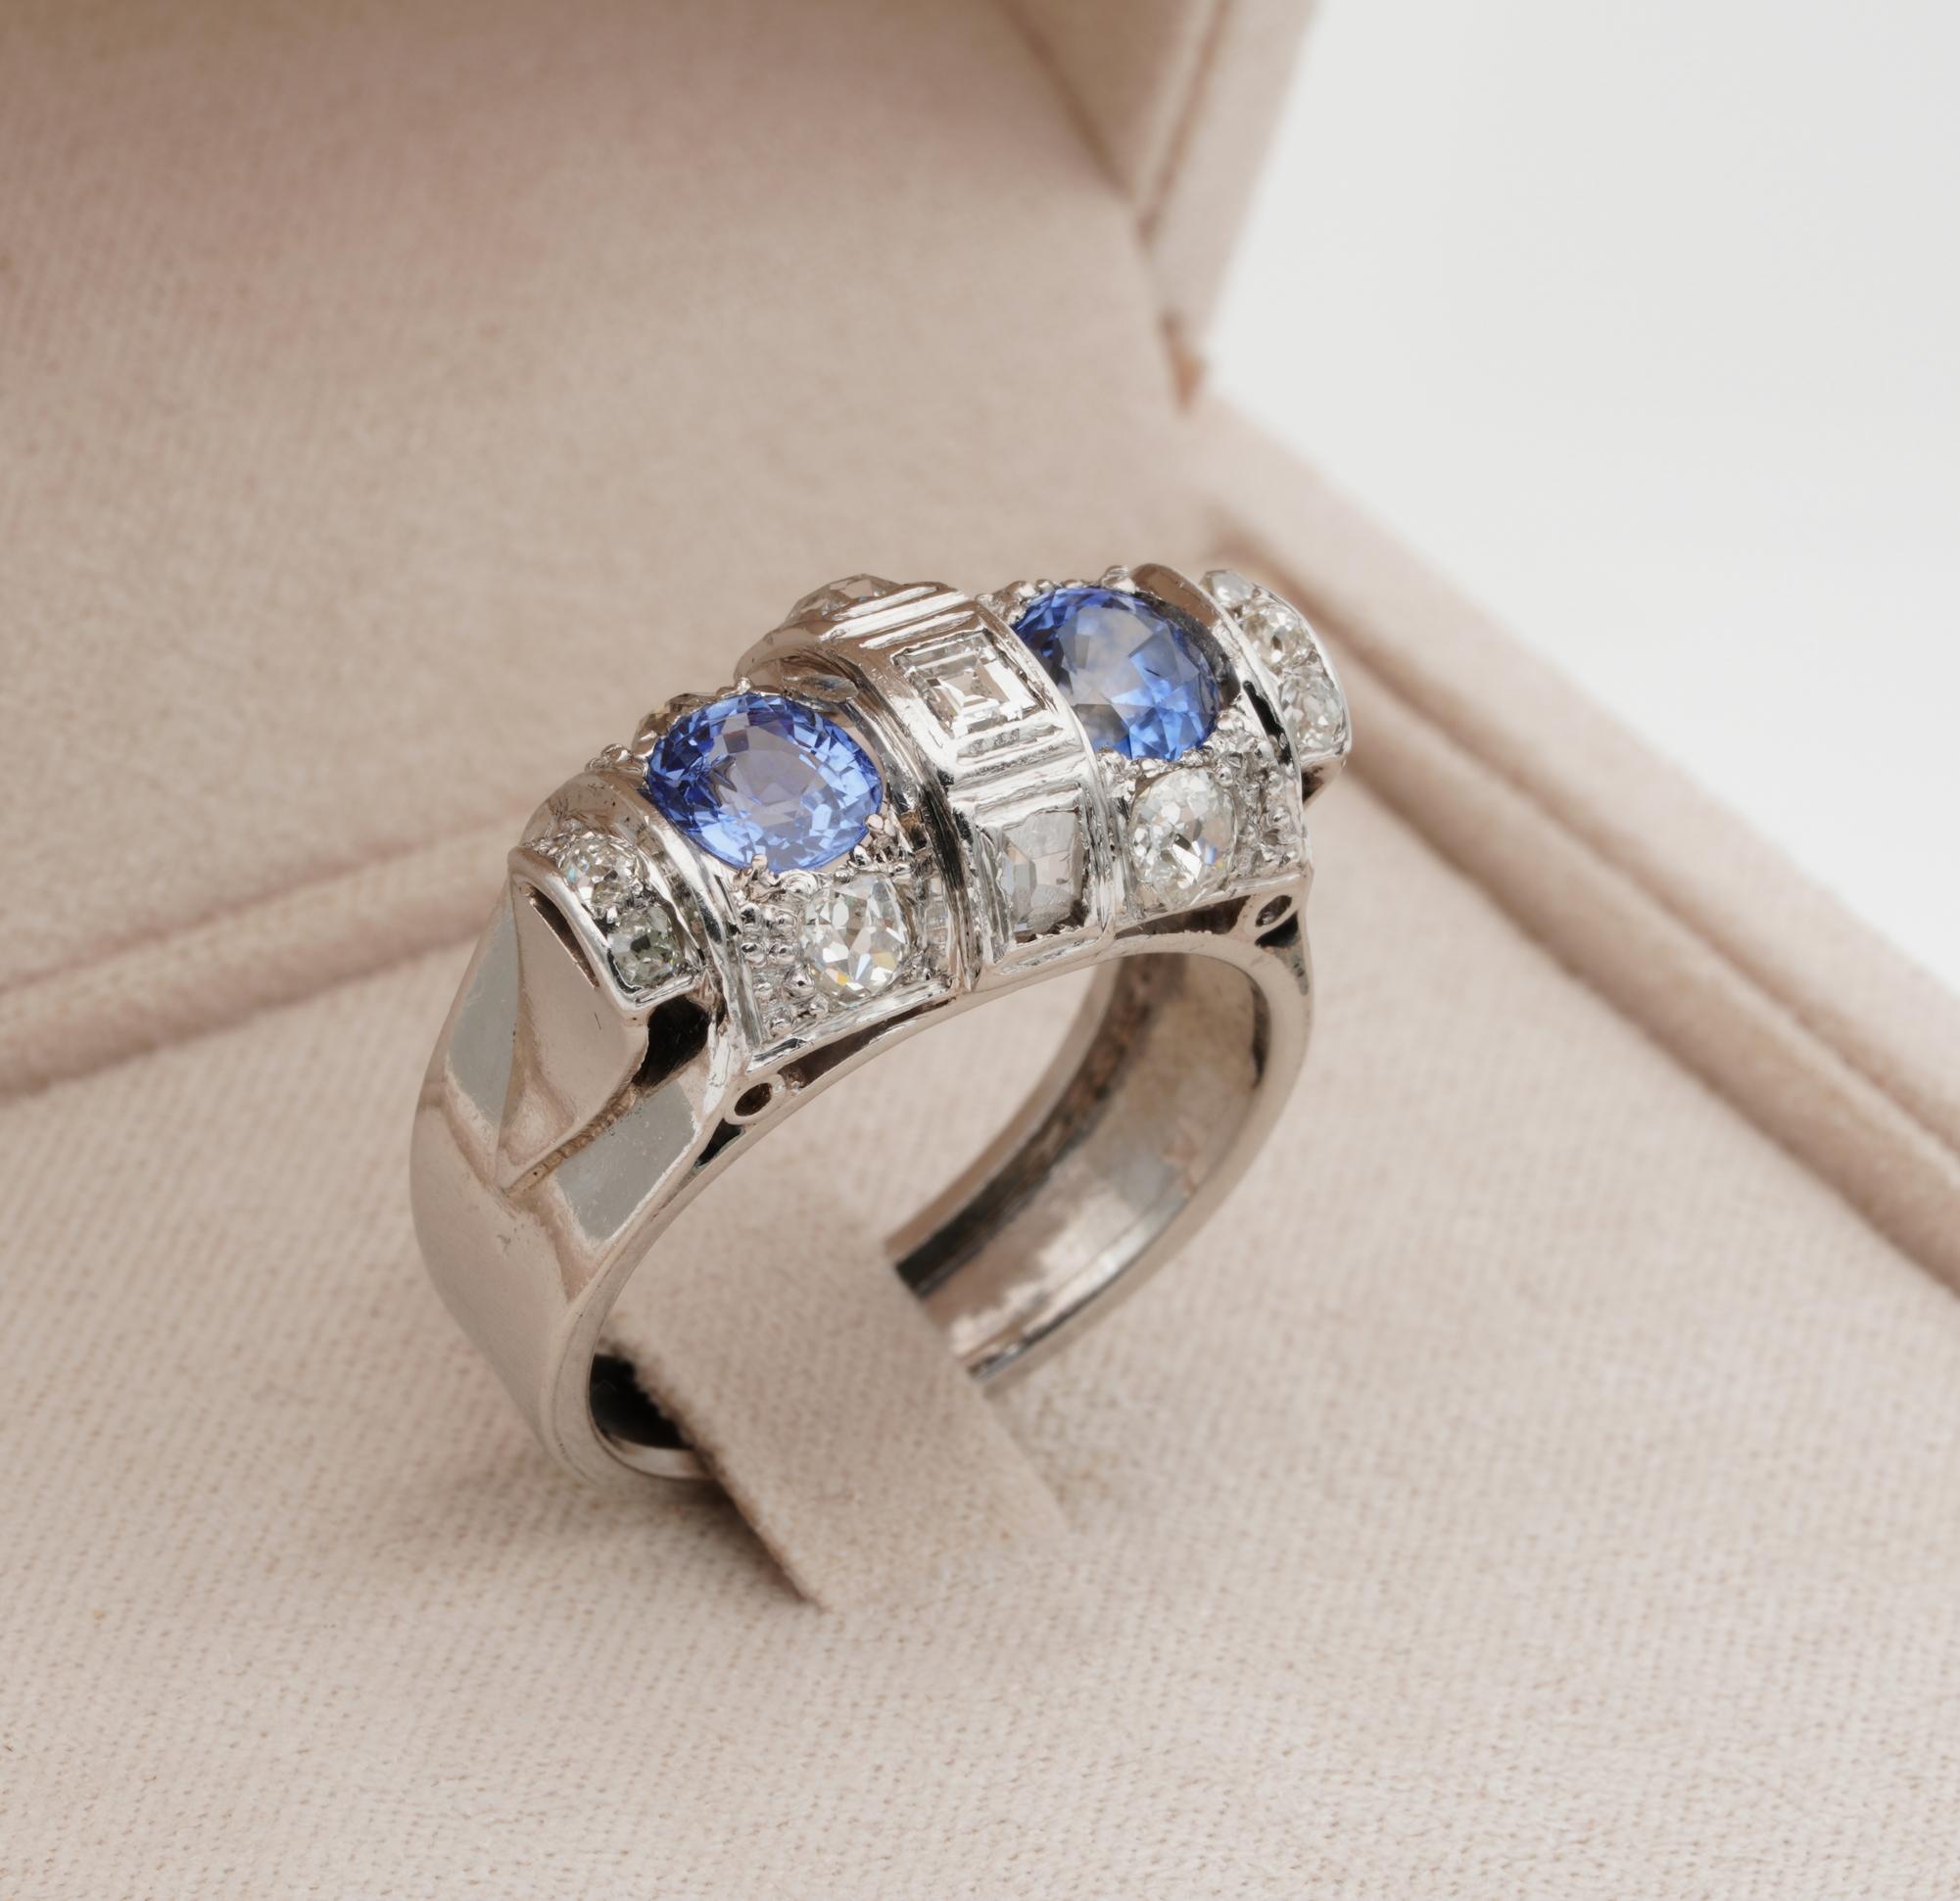 Women's or Men's Art Deco 1.60 Carat Natural Sapphire and 1.40 Carat Old Cut Diamond Rare Ring For Sale